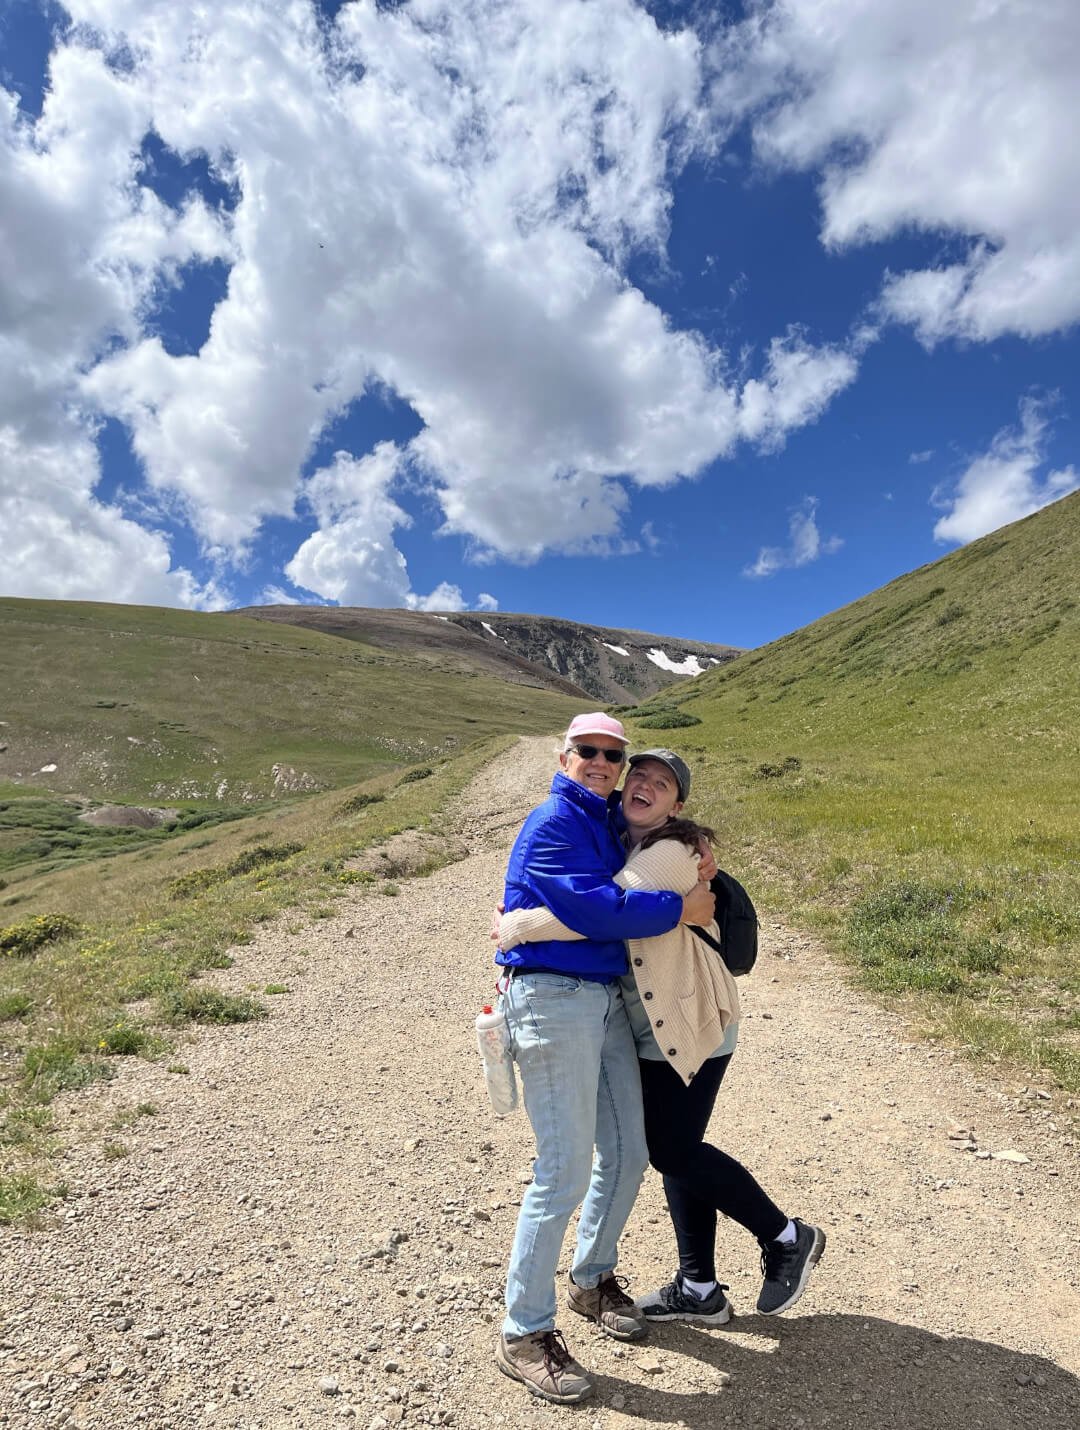 Sammi and her mom enjoying nature in Colorado